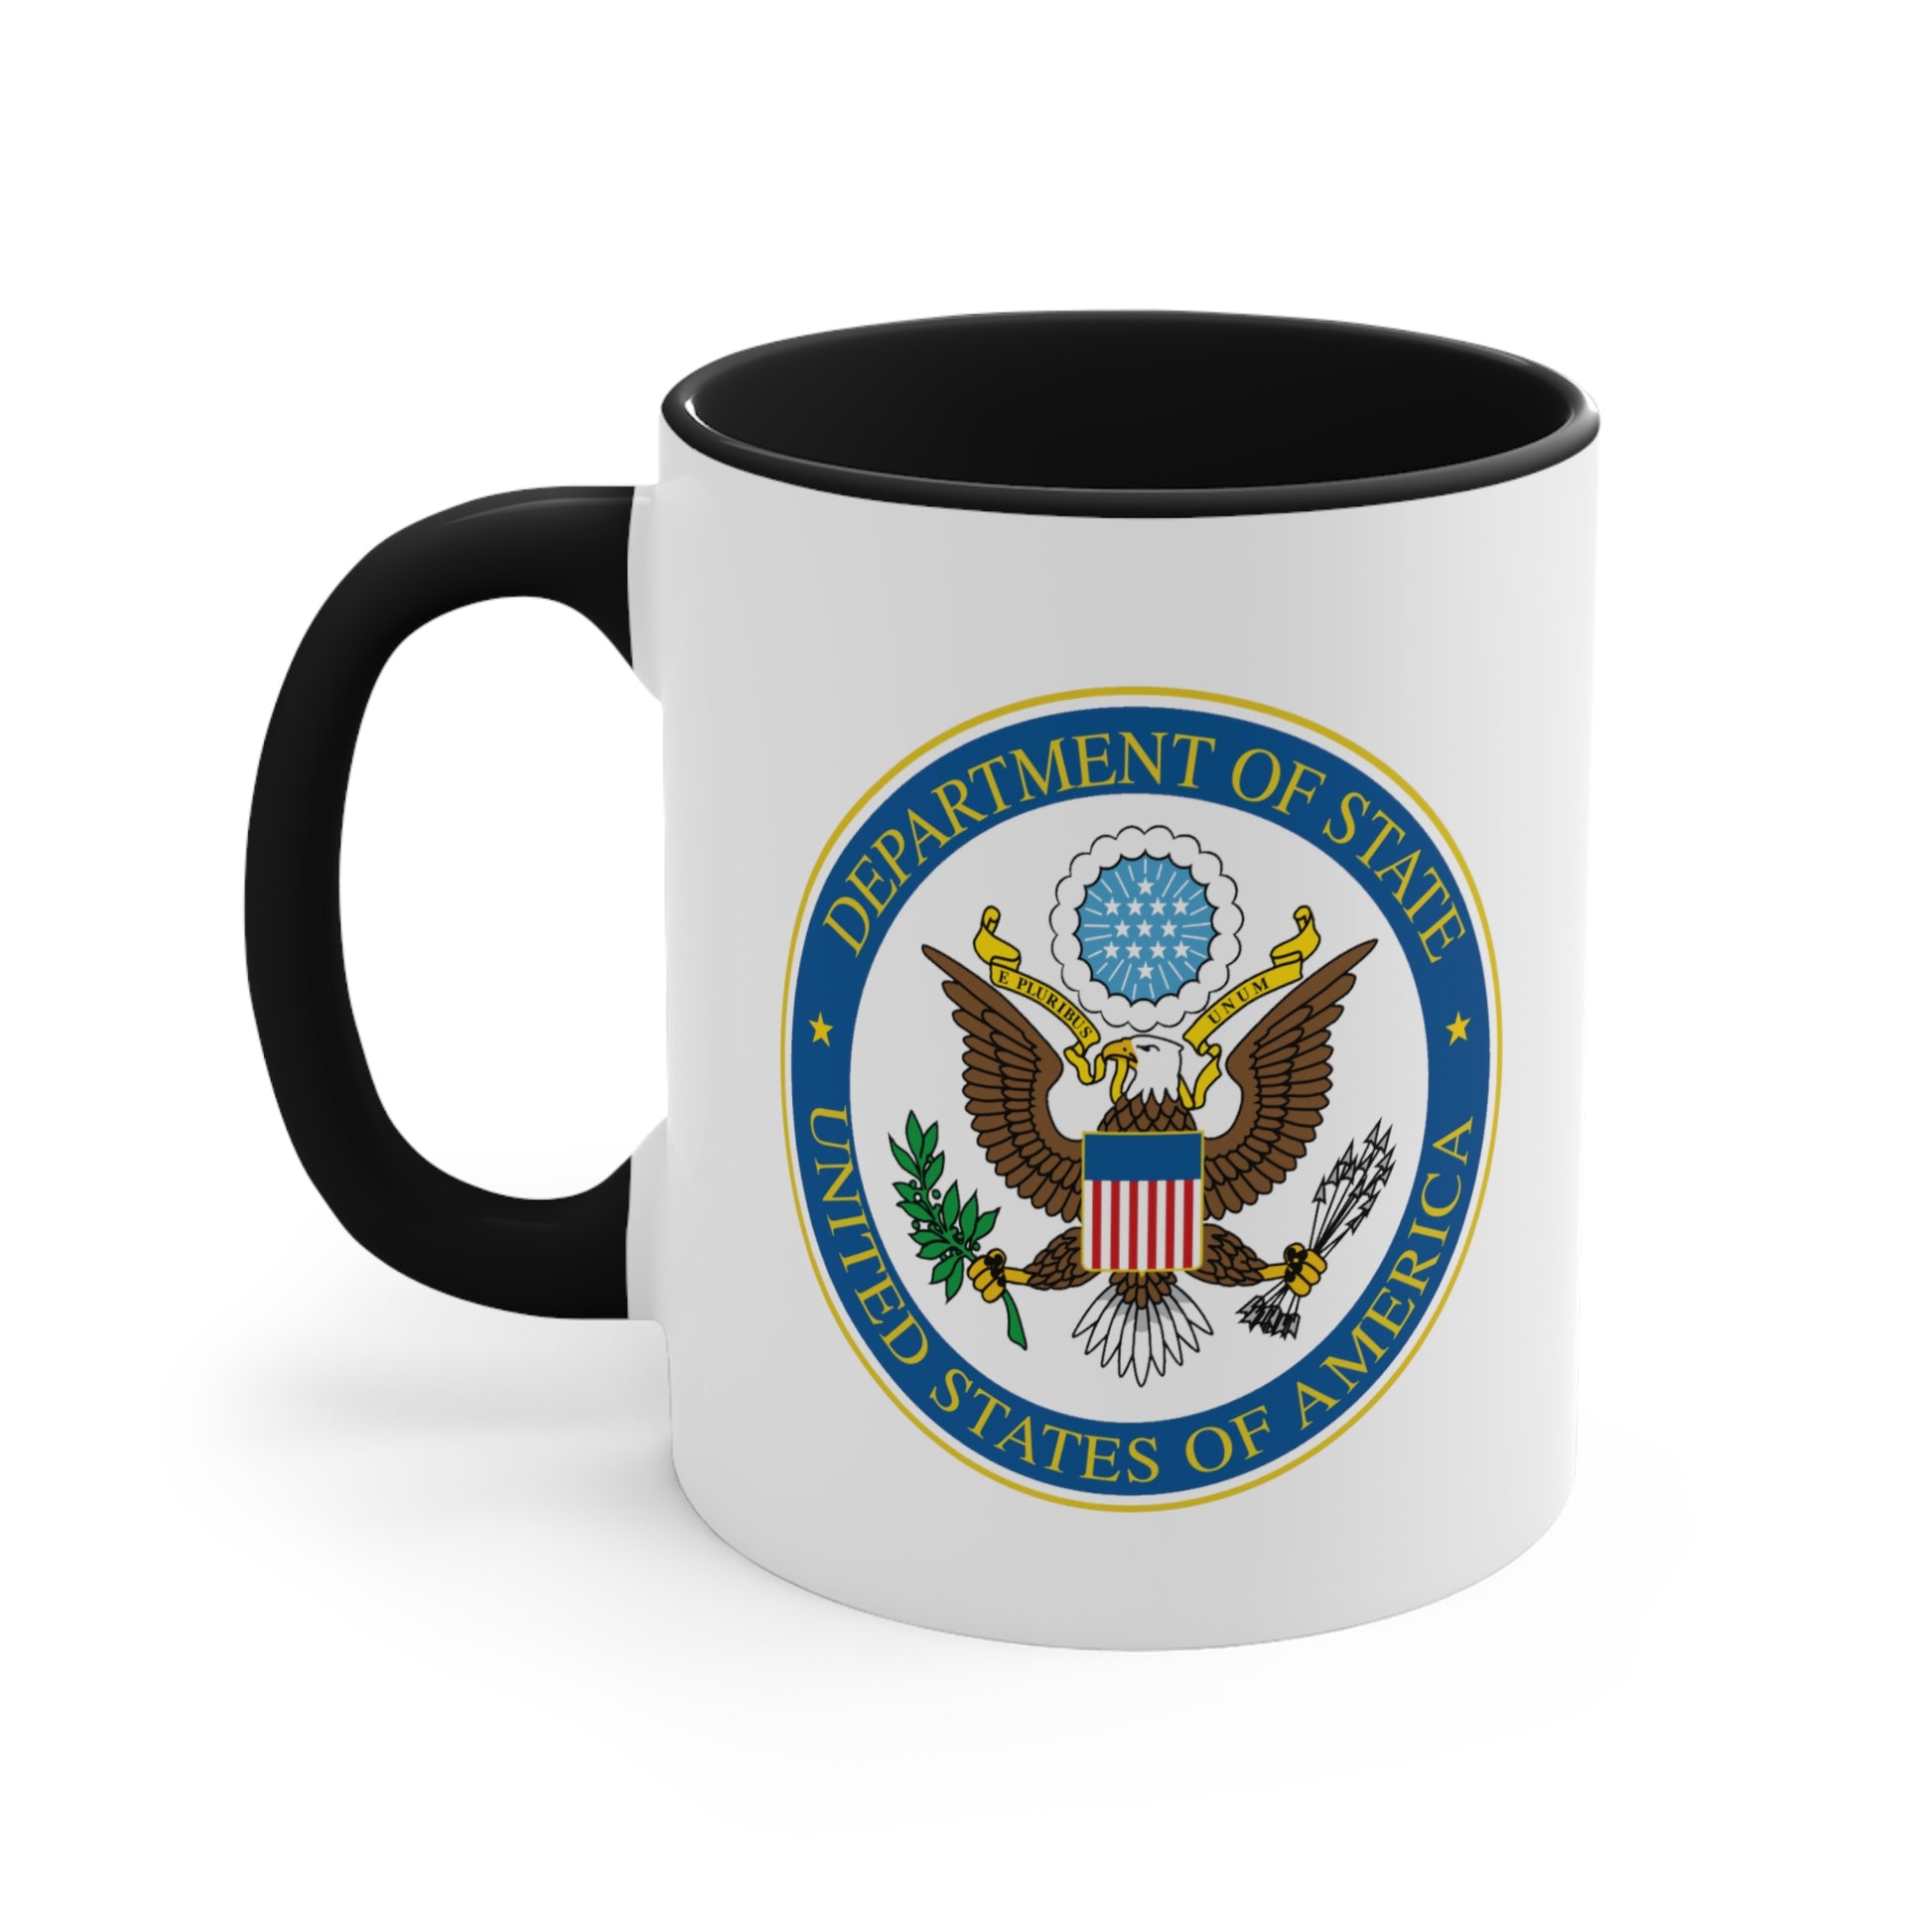 Department of State Coffee Mug - Double Sided Black Accent White Ceramic 11oz by TheGlassyLass.com